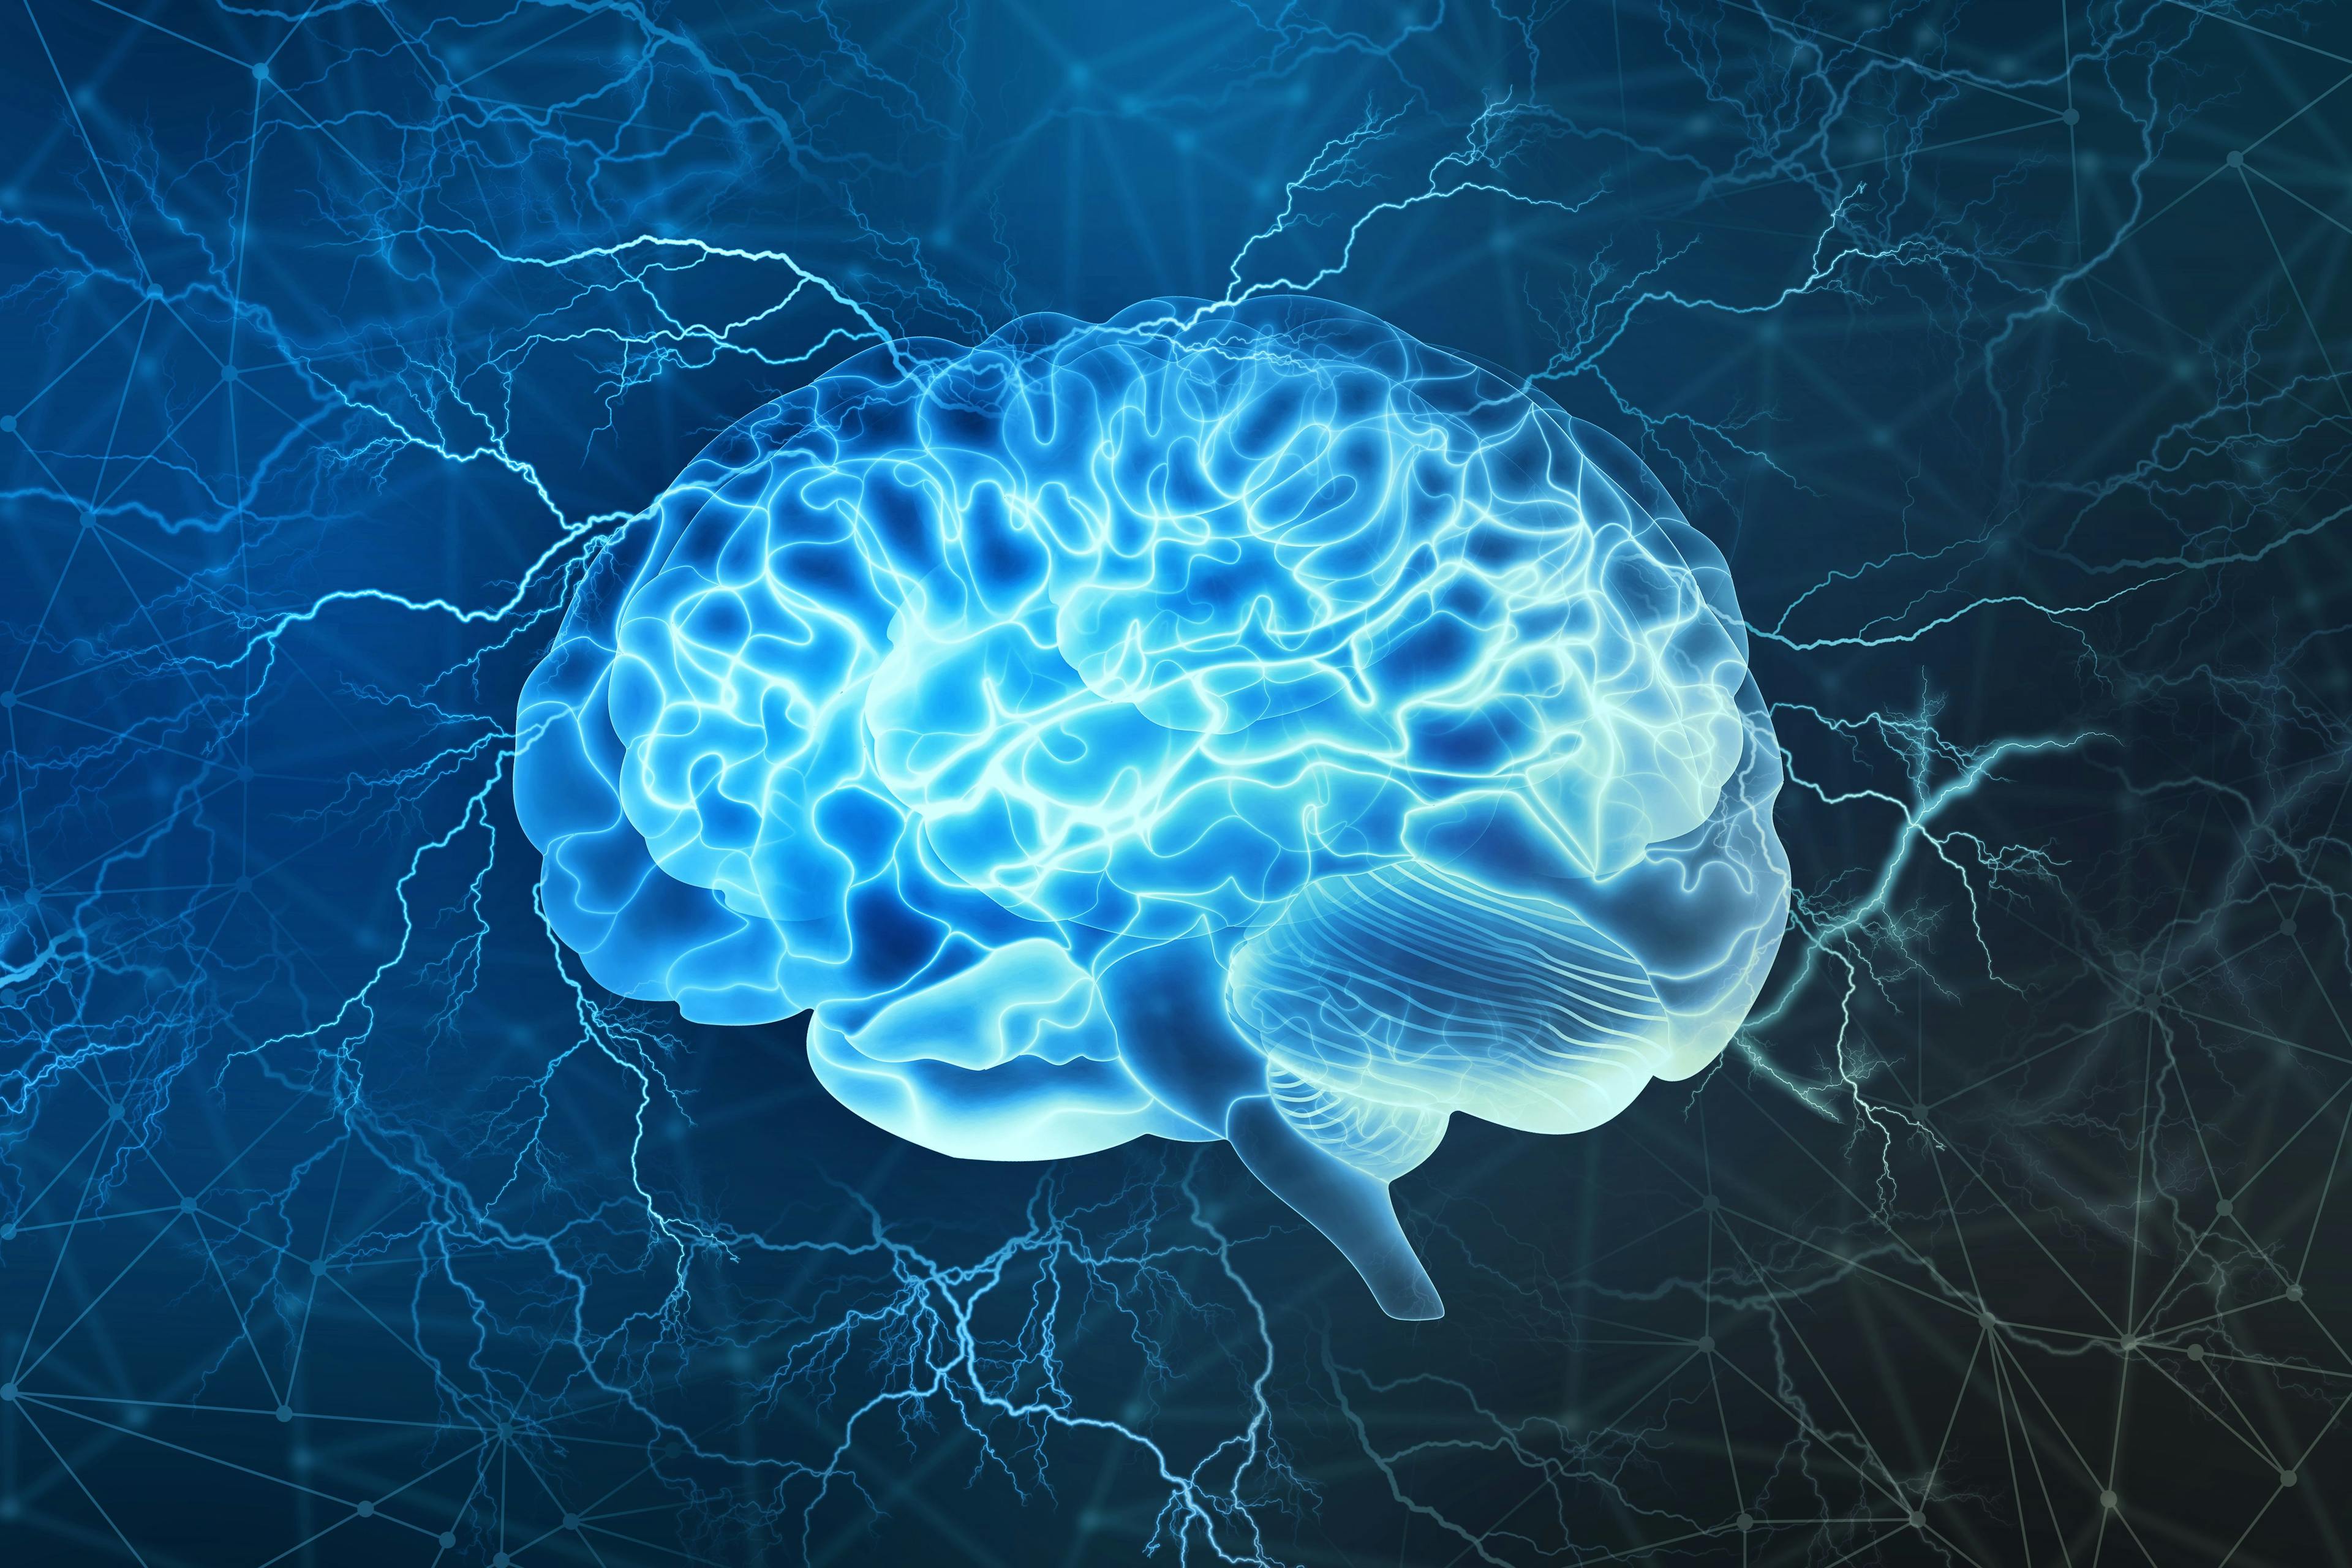 Human brain digital illustration. Electrical activity, flashes and lightning on a blue background. Image Credit: © Siarhei - stock.adobe.com